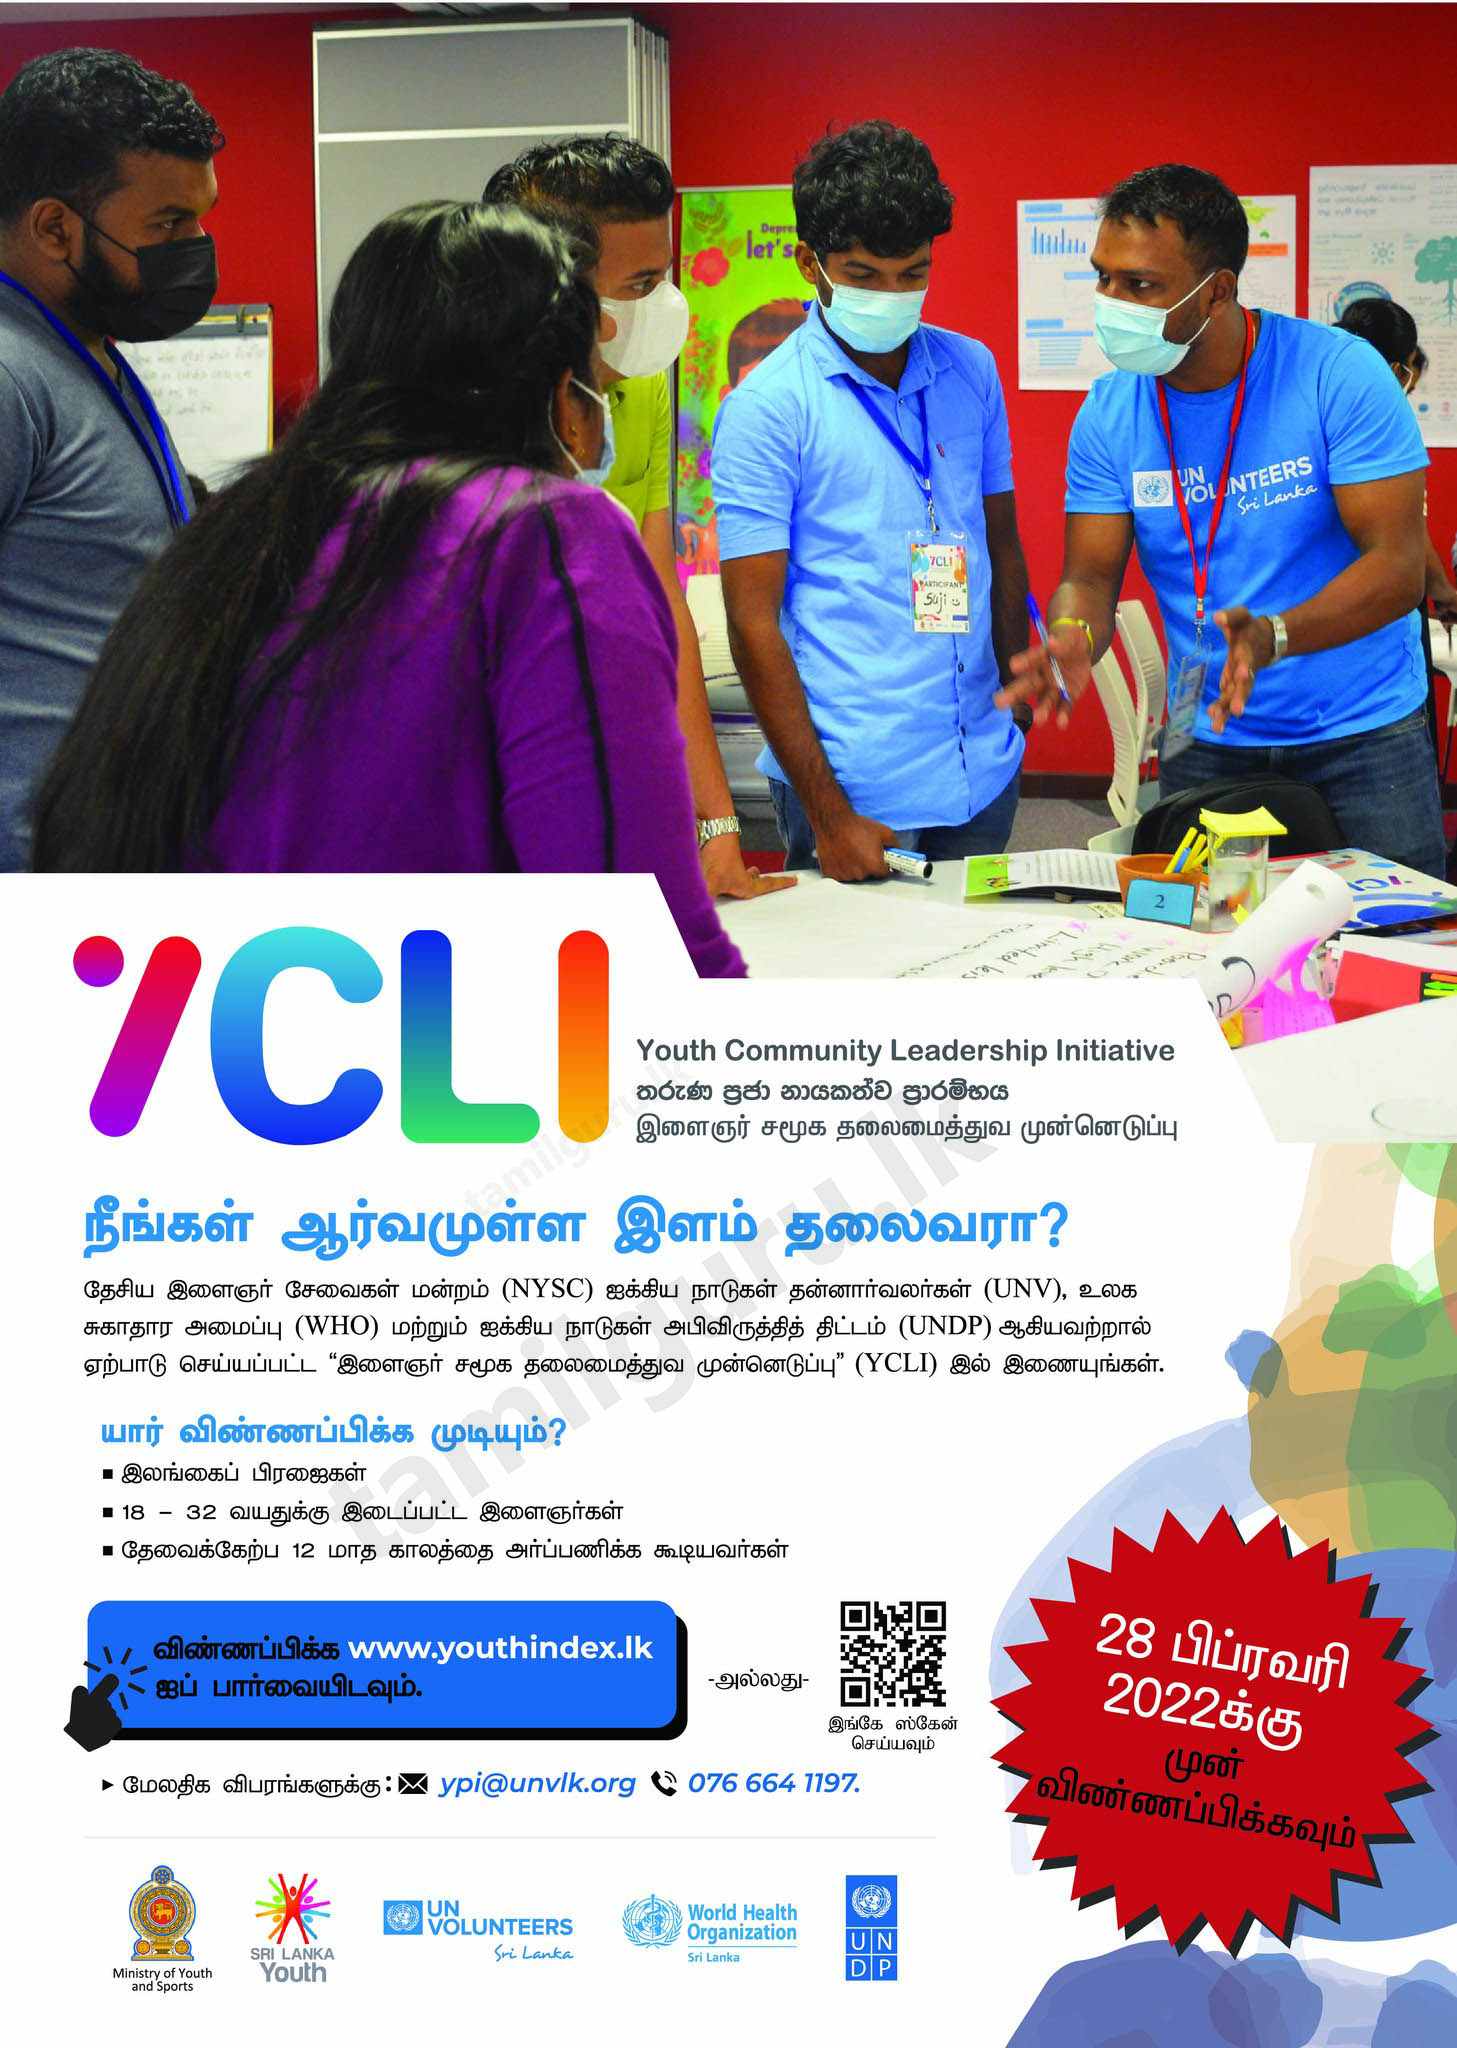 Youth Community Leadership Initiative (Training Programme) - Poster in Tamil